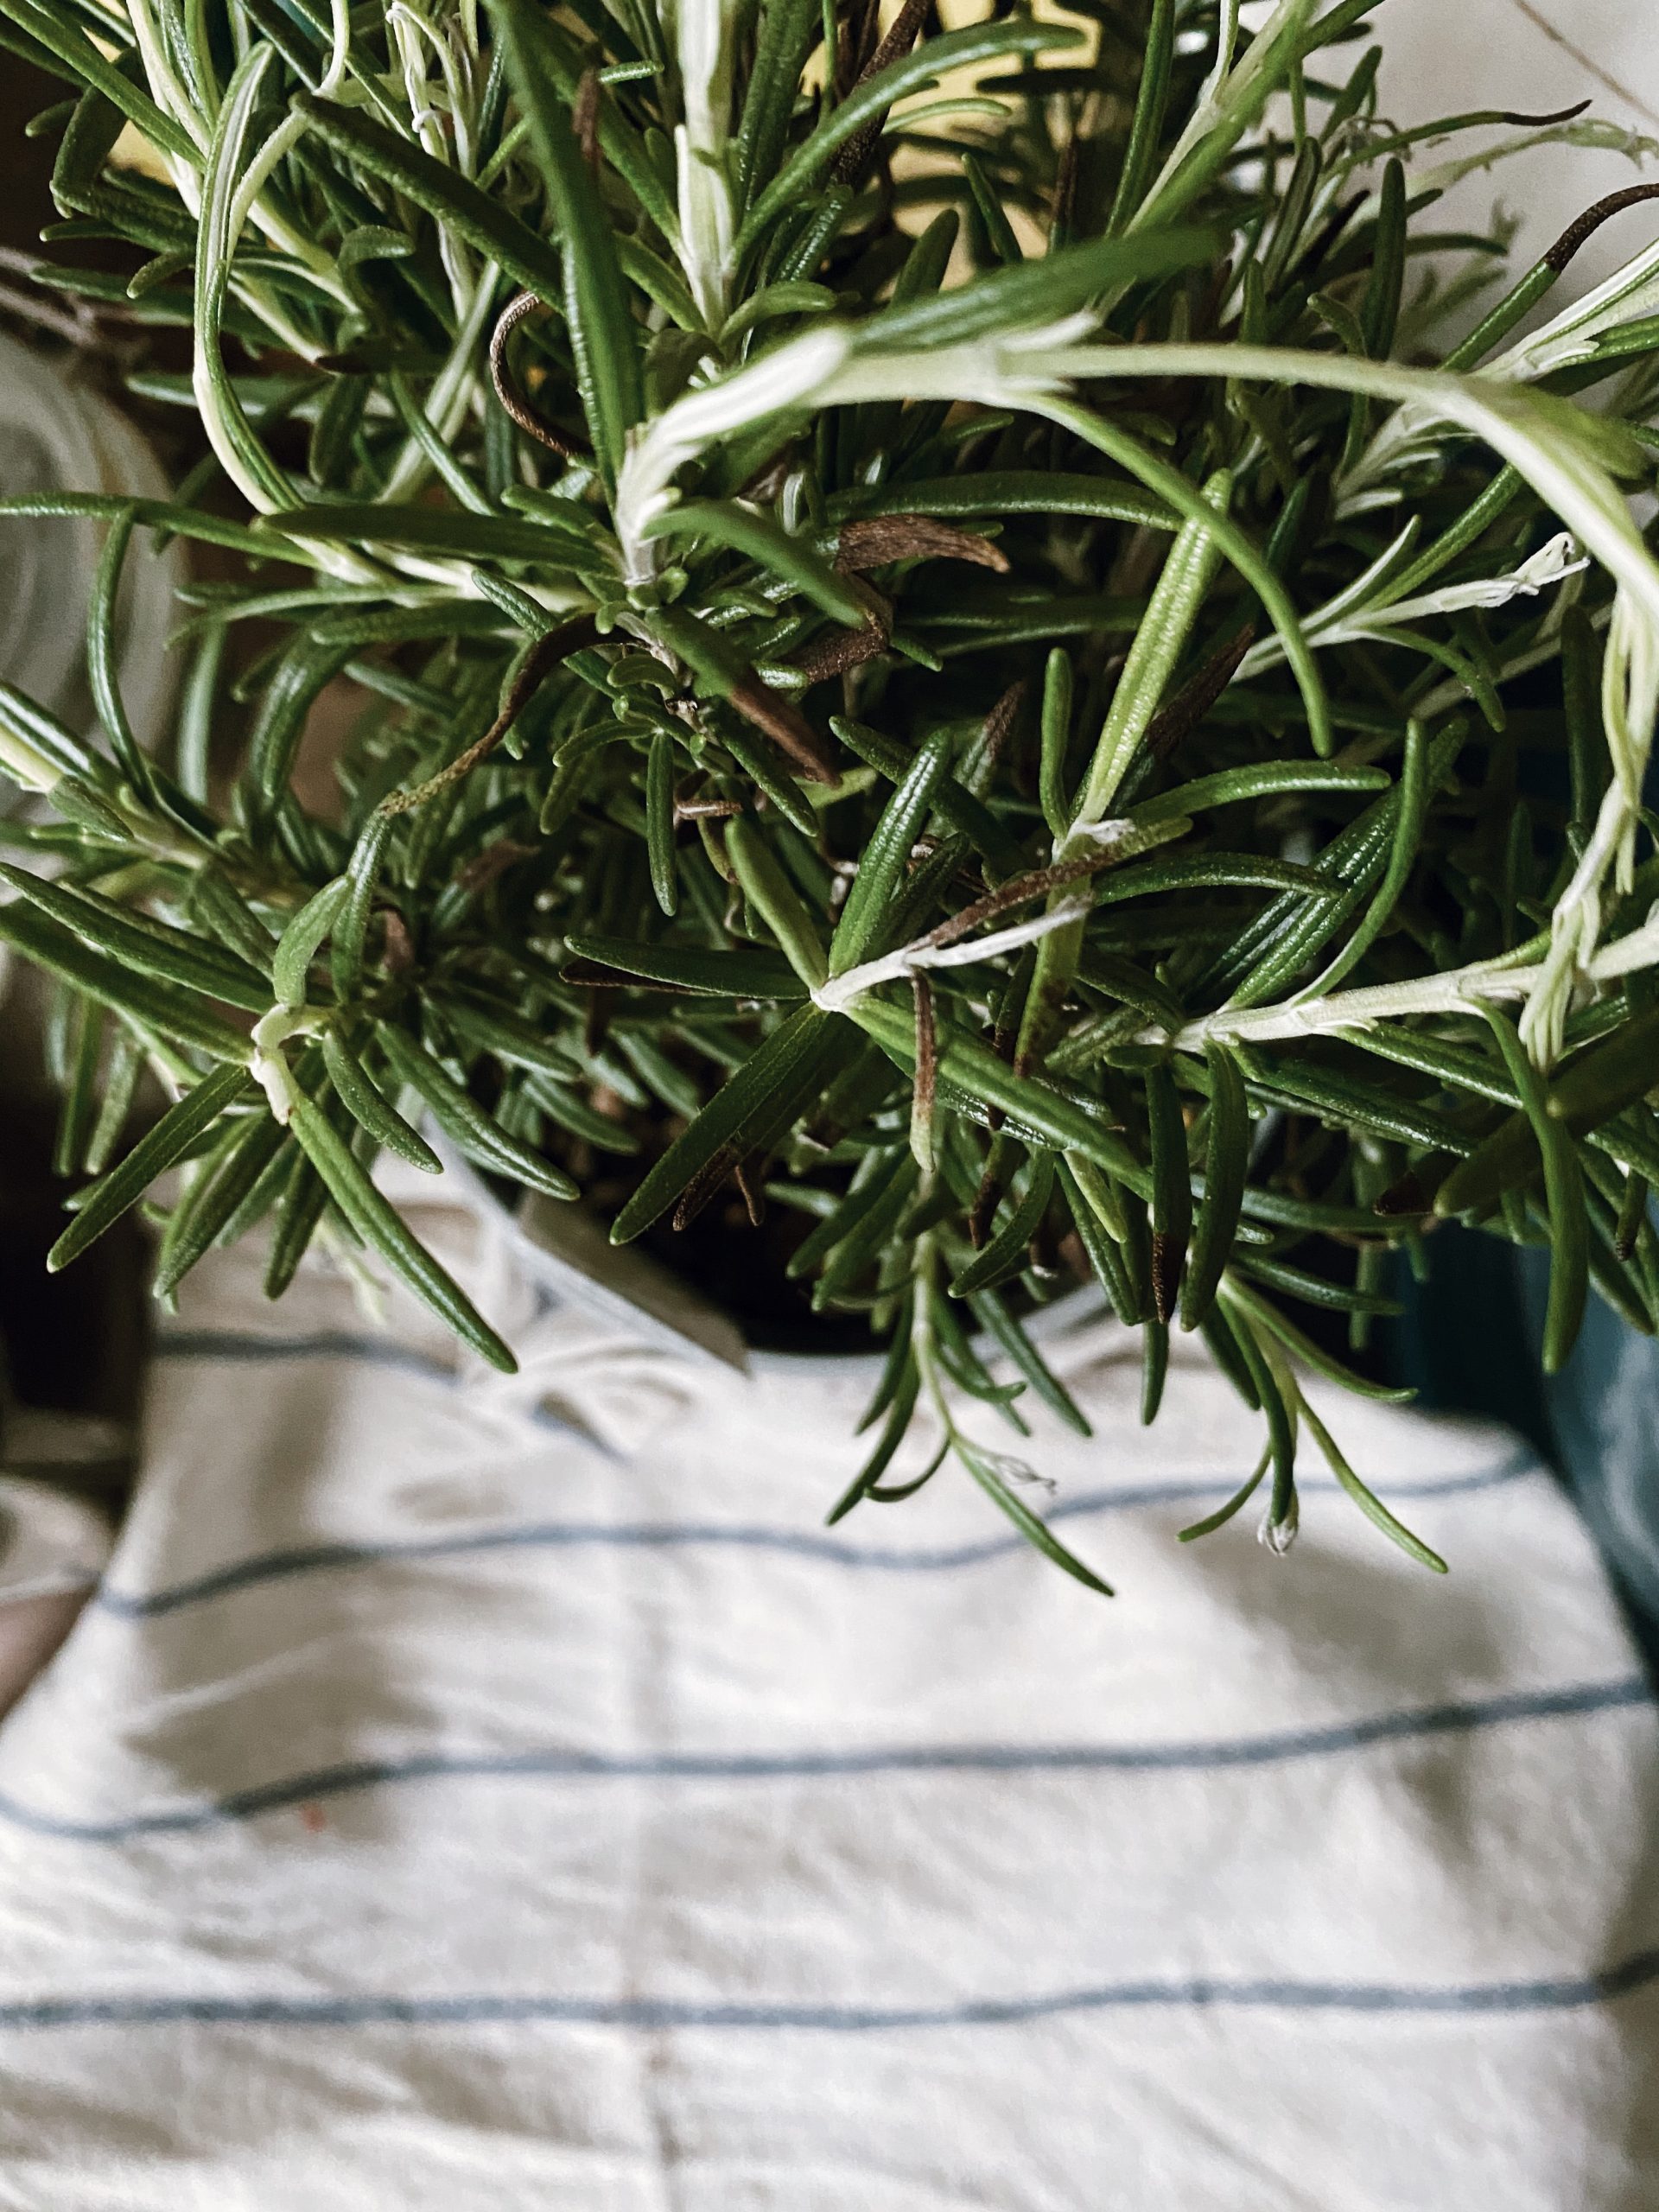 Can You Rosemary From Grocery Store Herbs? Is It Possible?